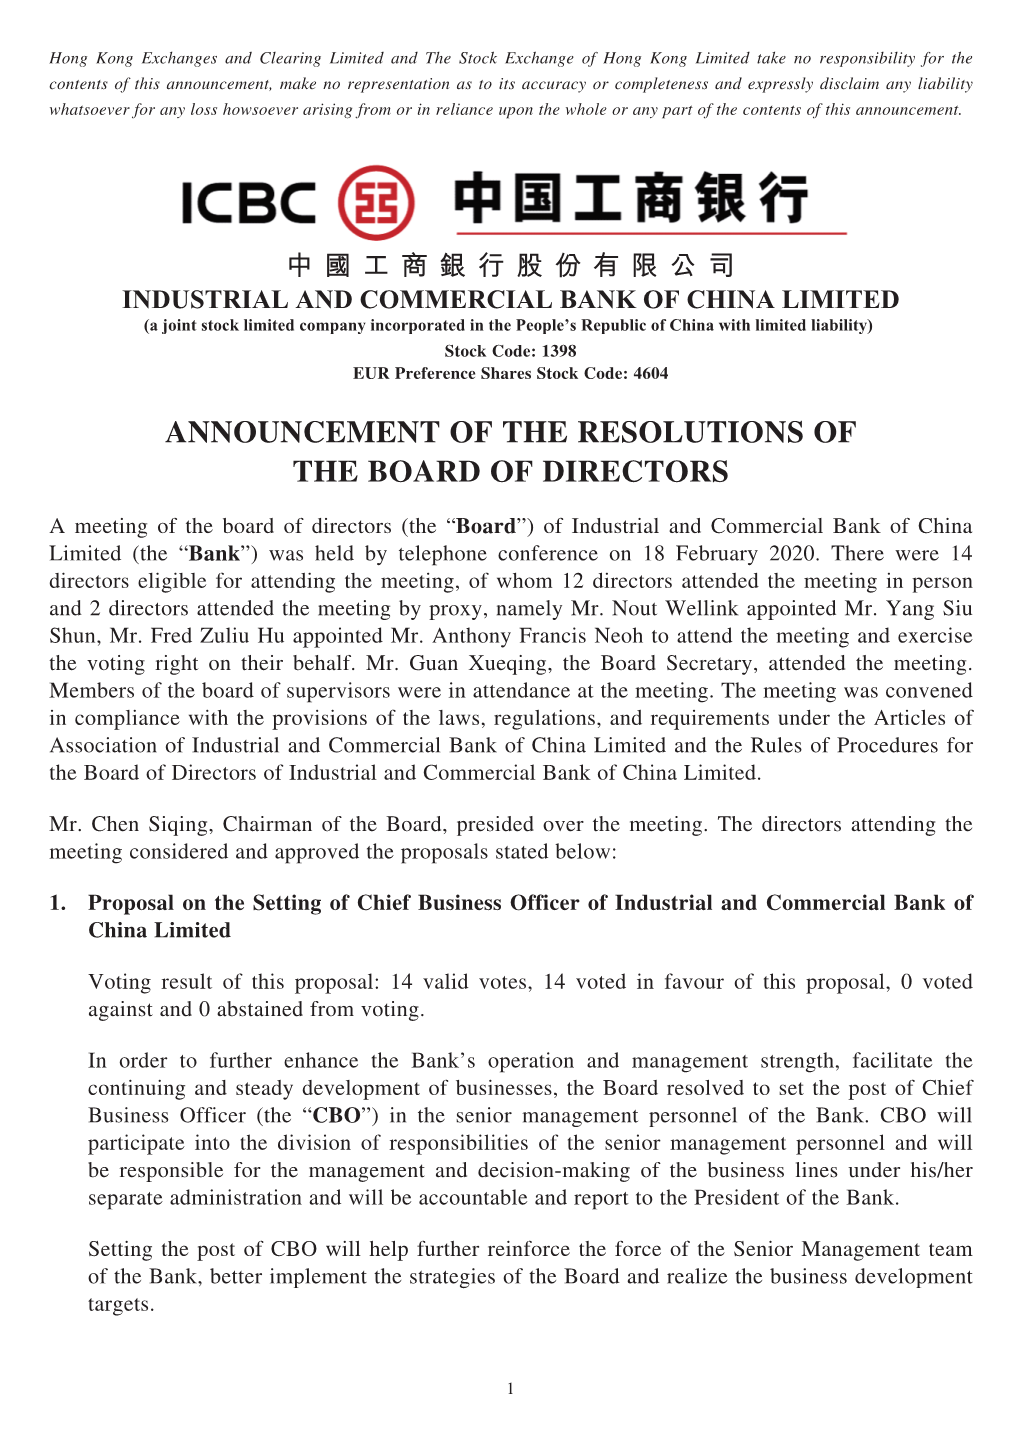 Announcement of the Resolutions of the Board of Directors